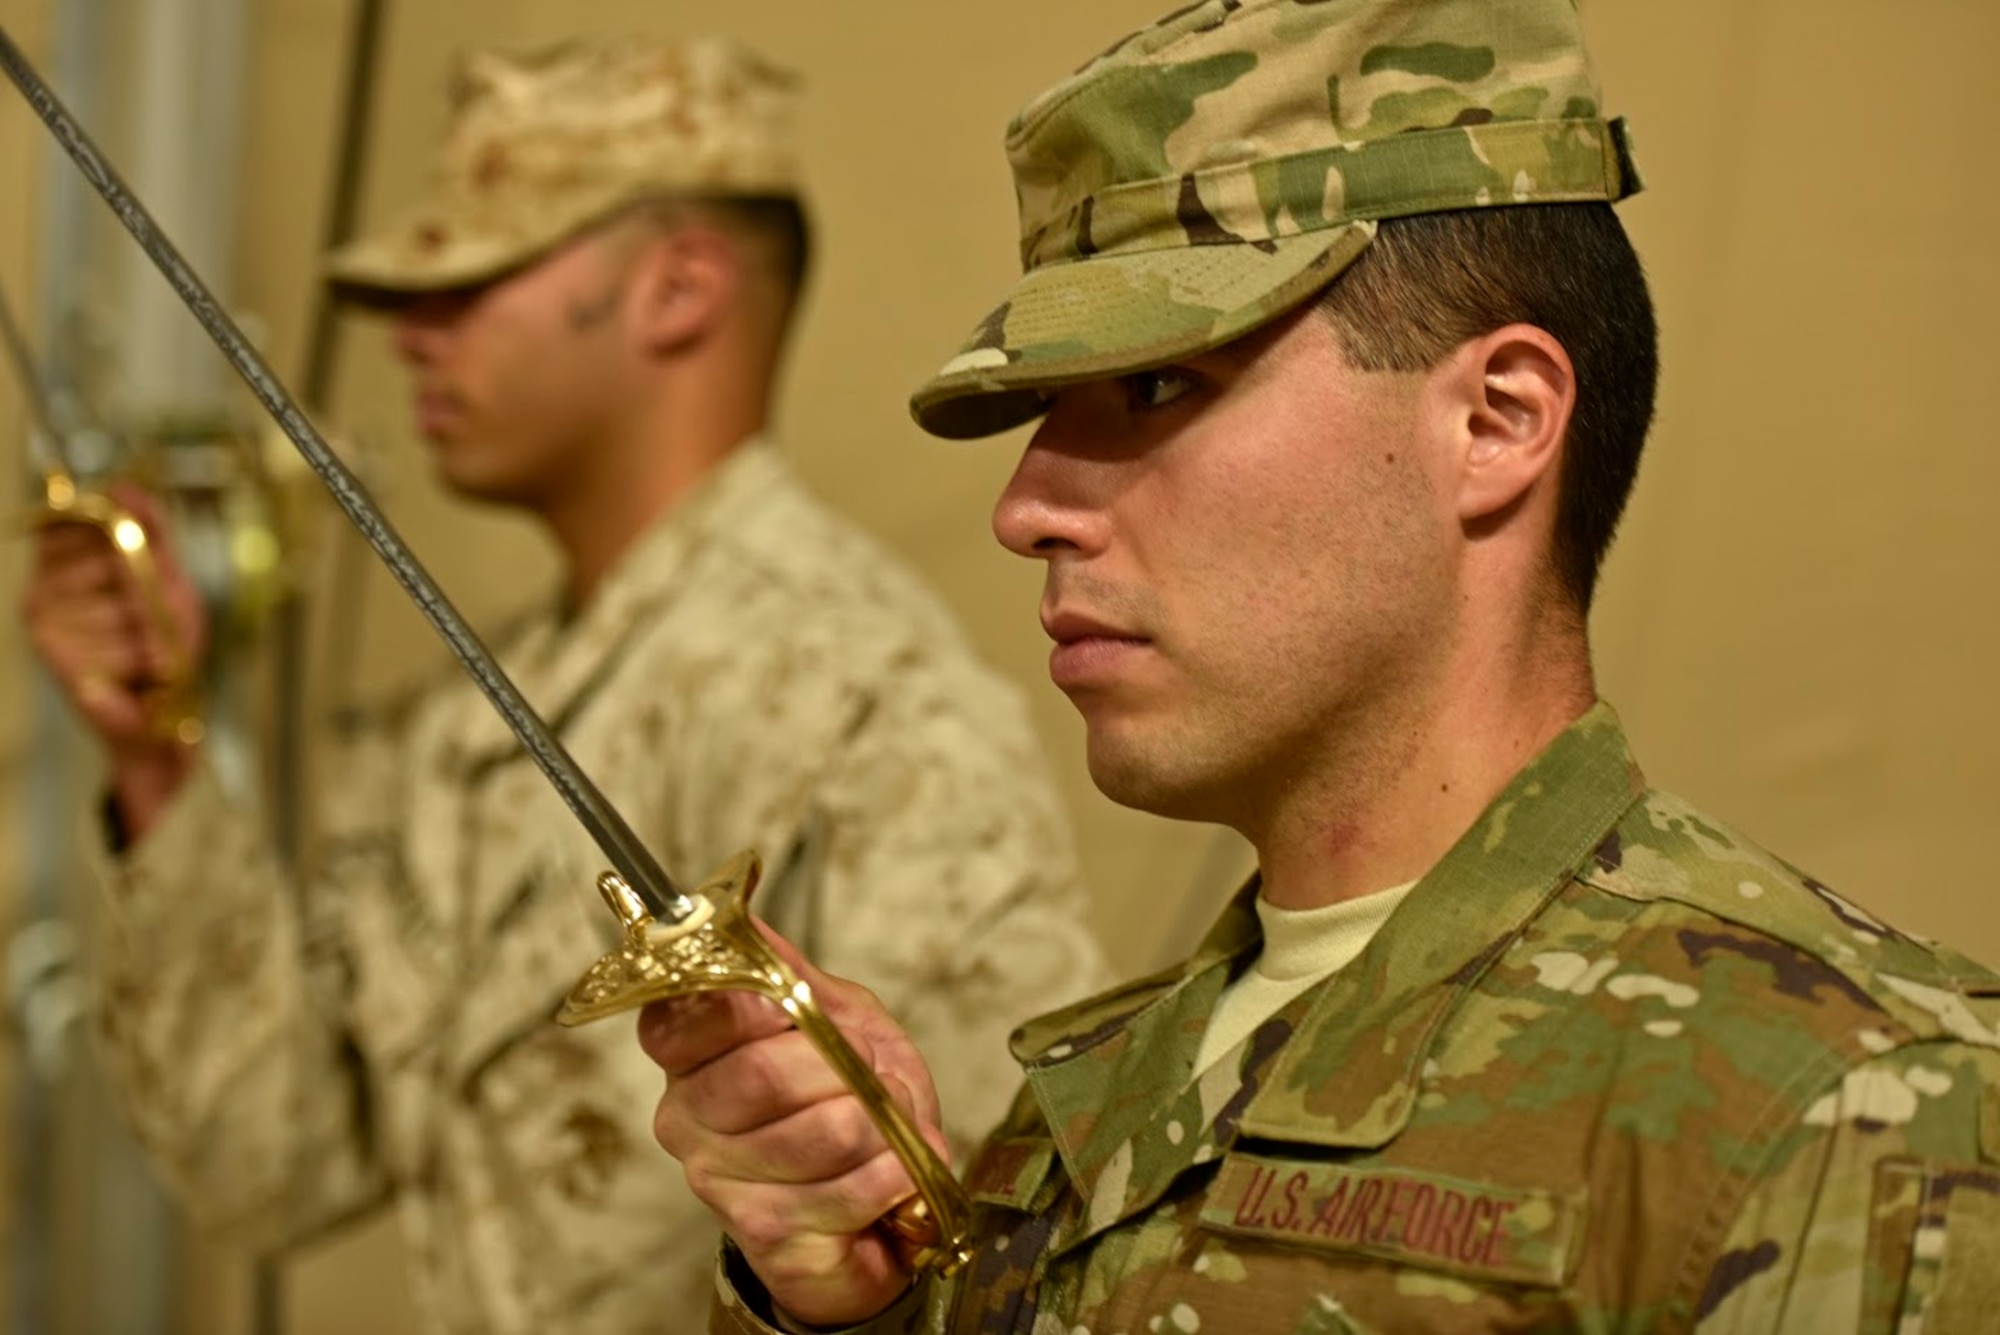 U.S. Air Force Senior Airman Jose Cobo Bernal, 407th Expeditionary Logistic Readiness Squadron materiel management technician, practices sword drill during a U.S. Marine Corps Corporal’s Course May 2, 2017. The corporal’s course is a 14-day formal training event designed to educate Marine corporals on the duties and responsibilities of an NCO. Deployed Airmen were granted the opportunity to attend the course, which is an eligibility requirement for Marines before promoting to the rank of sergeant. (U.S. Air Force photo by Senior Airman Ramon A. Adelan) 